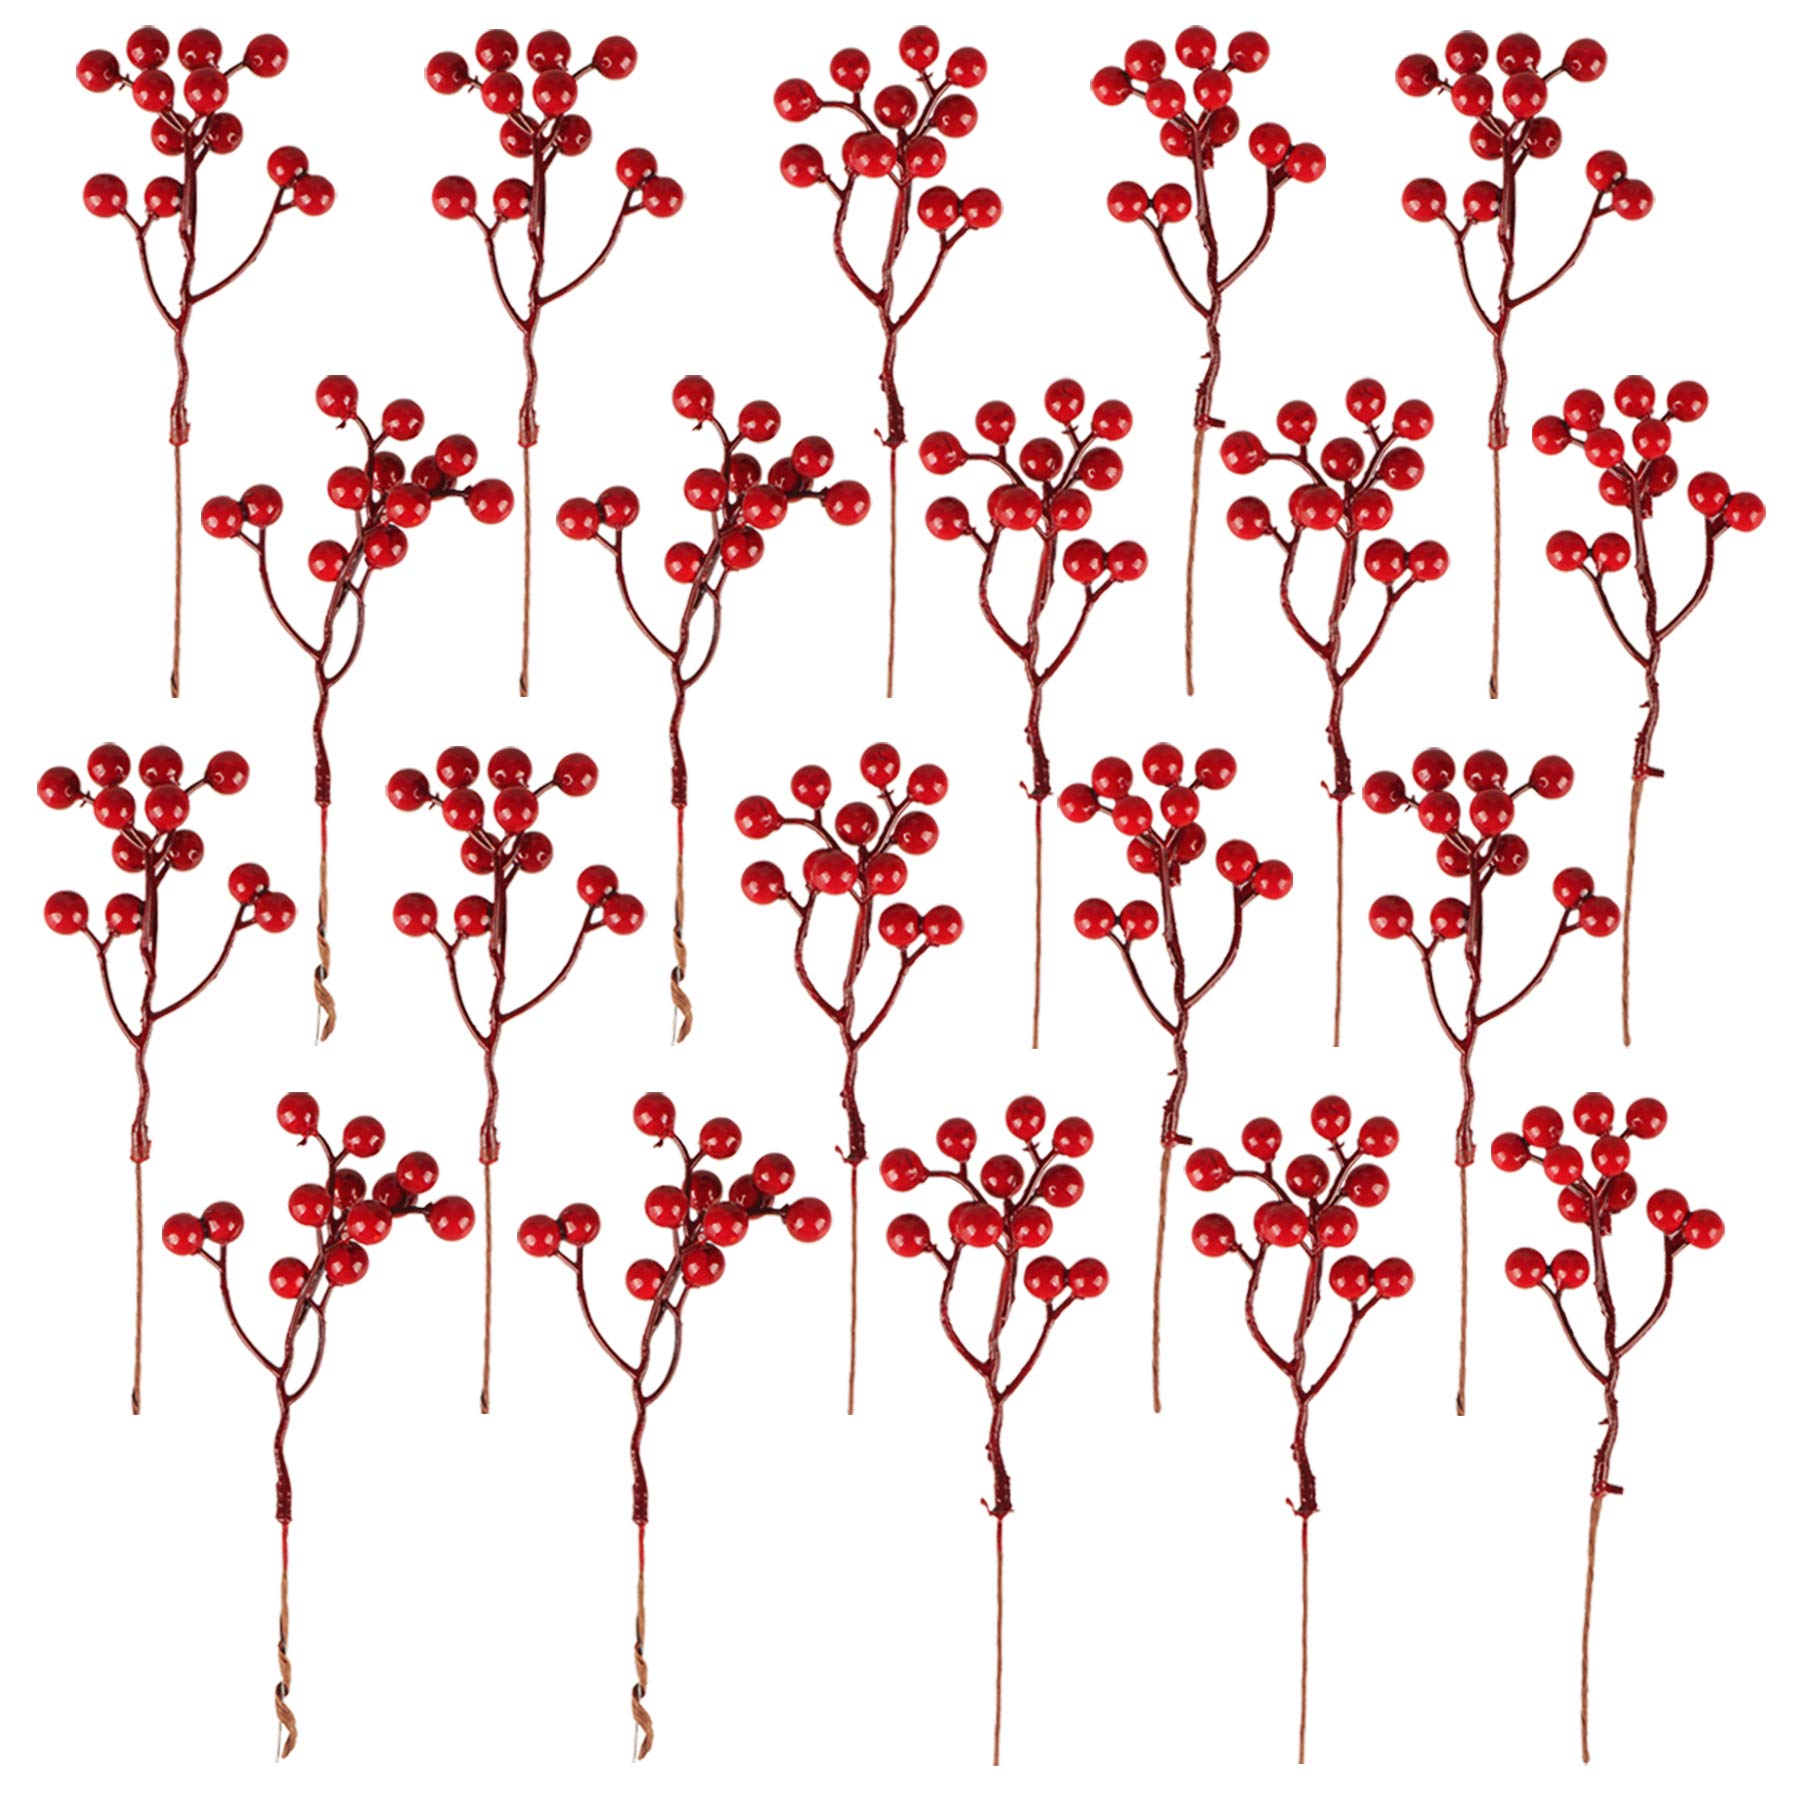 20pcs Artificial Red Berries Fake Flowers Fruits Berry Stems